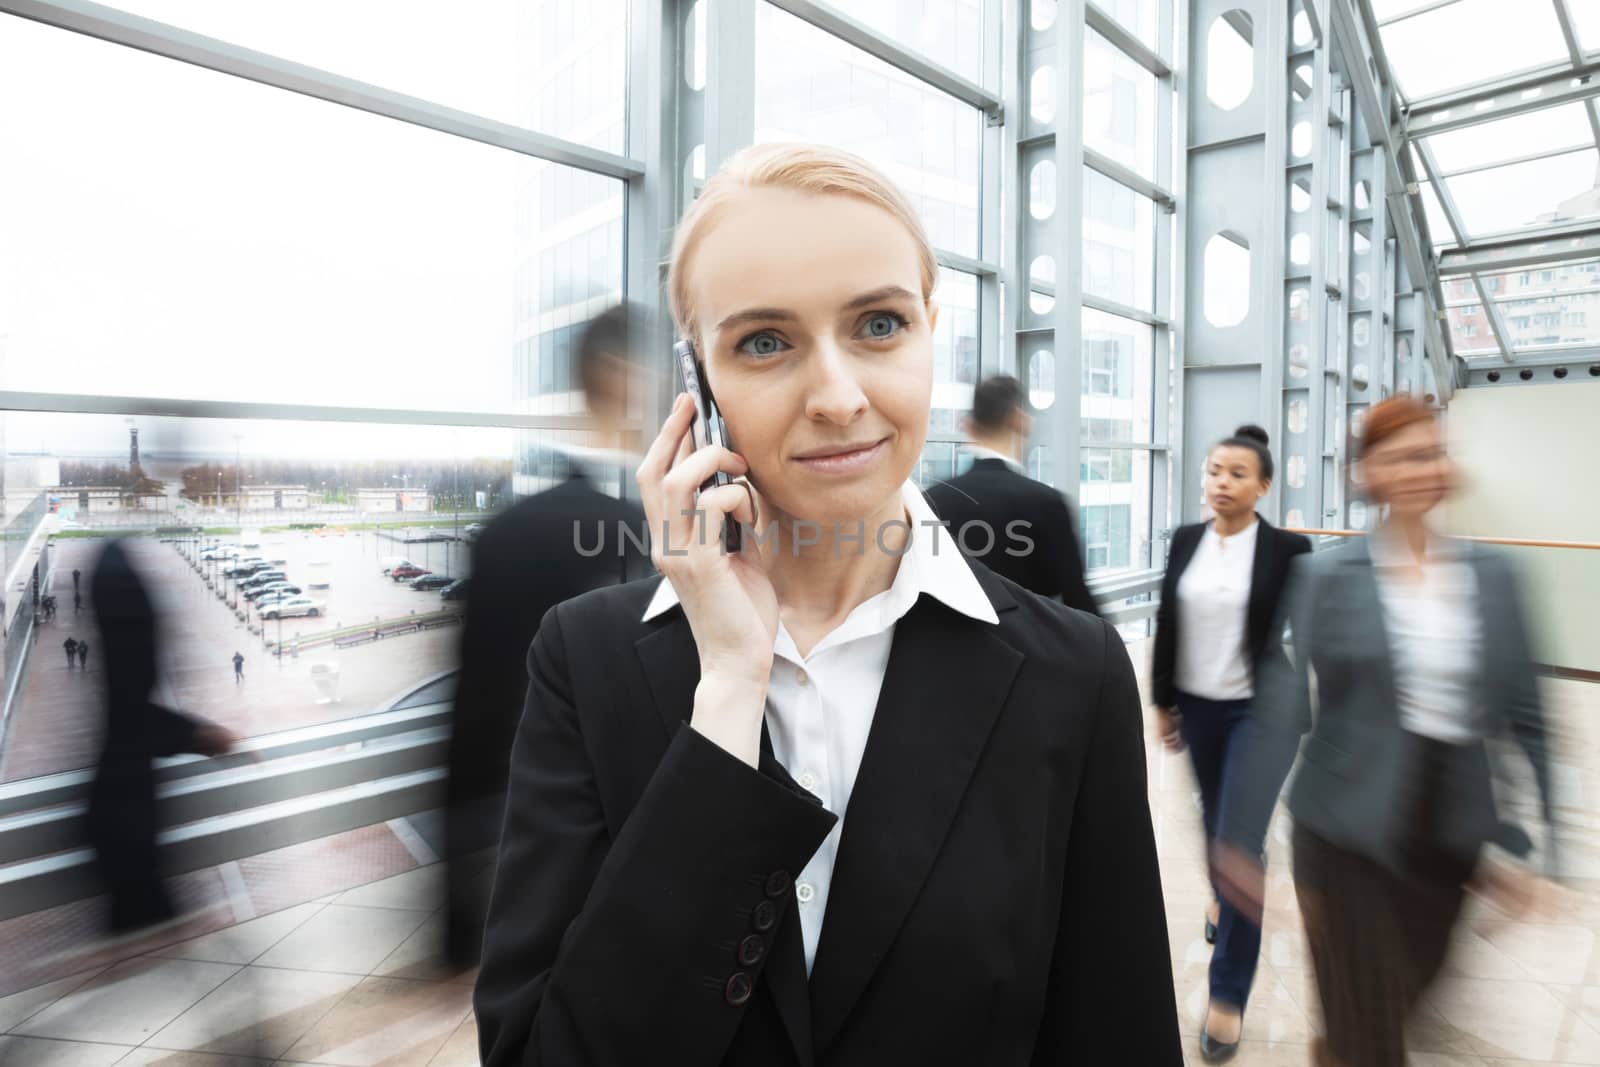 Business woman talking on phone standing in a crowd of walking people